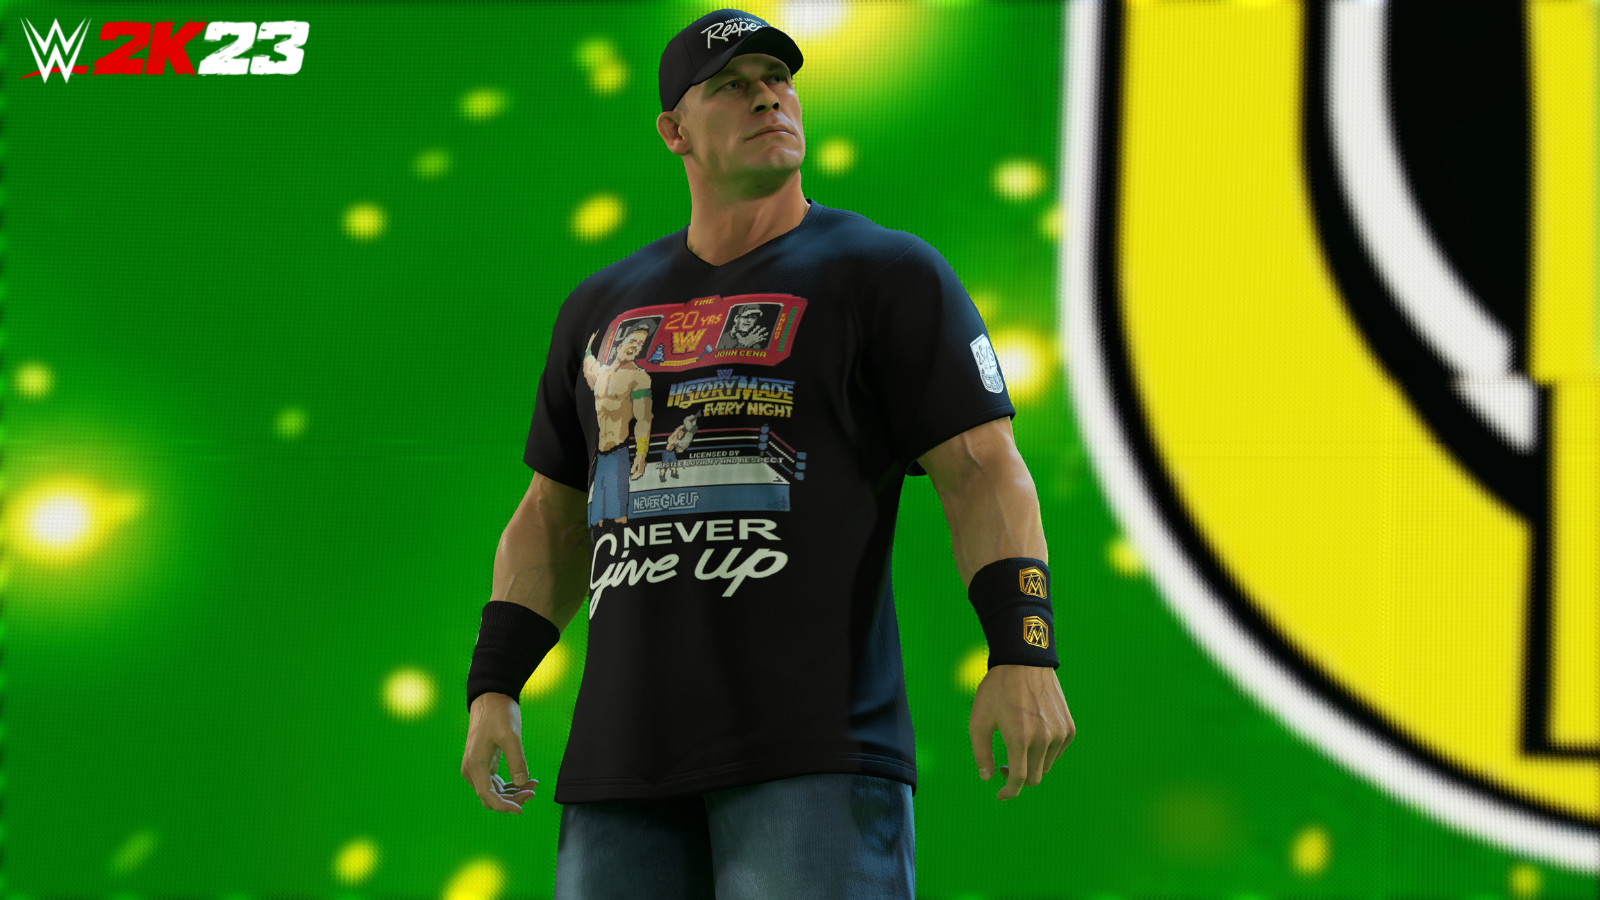 WWE superstar John Cena making his entrance in WWE 2K23; he is wearing a t-shirt that shows him wrestling in 8-bit video game art, over the motto “Never Give Up.”